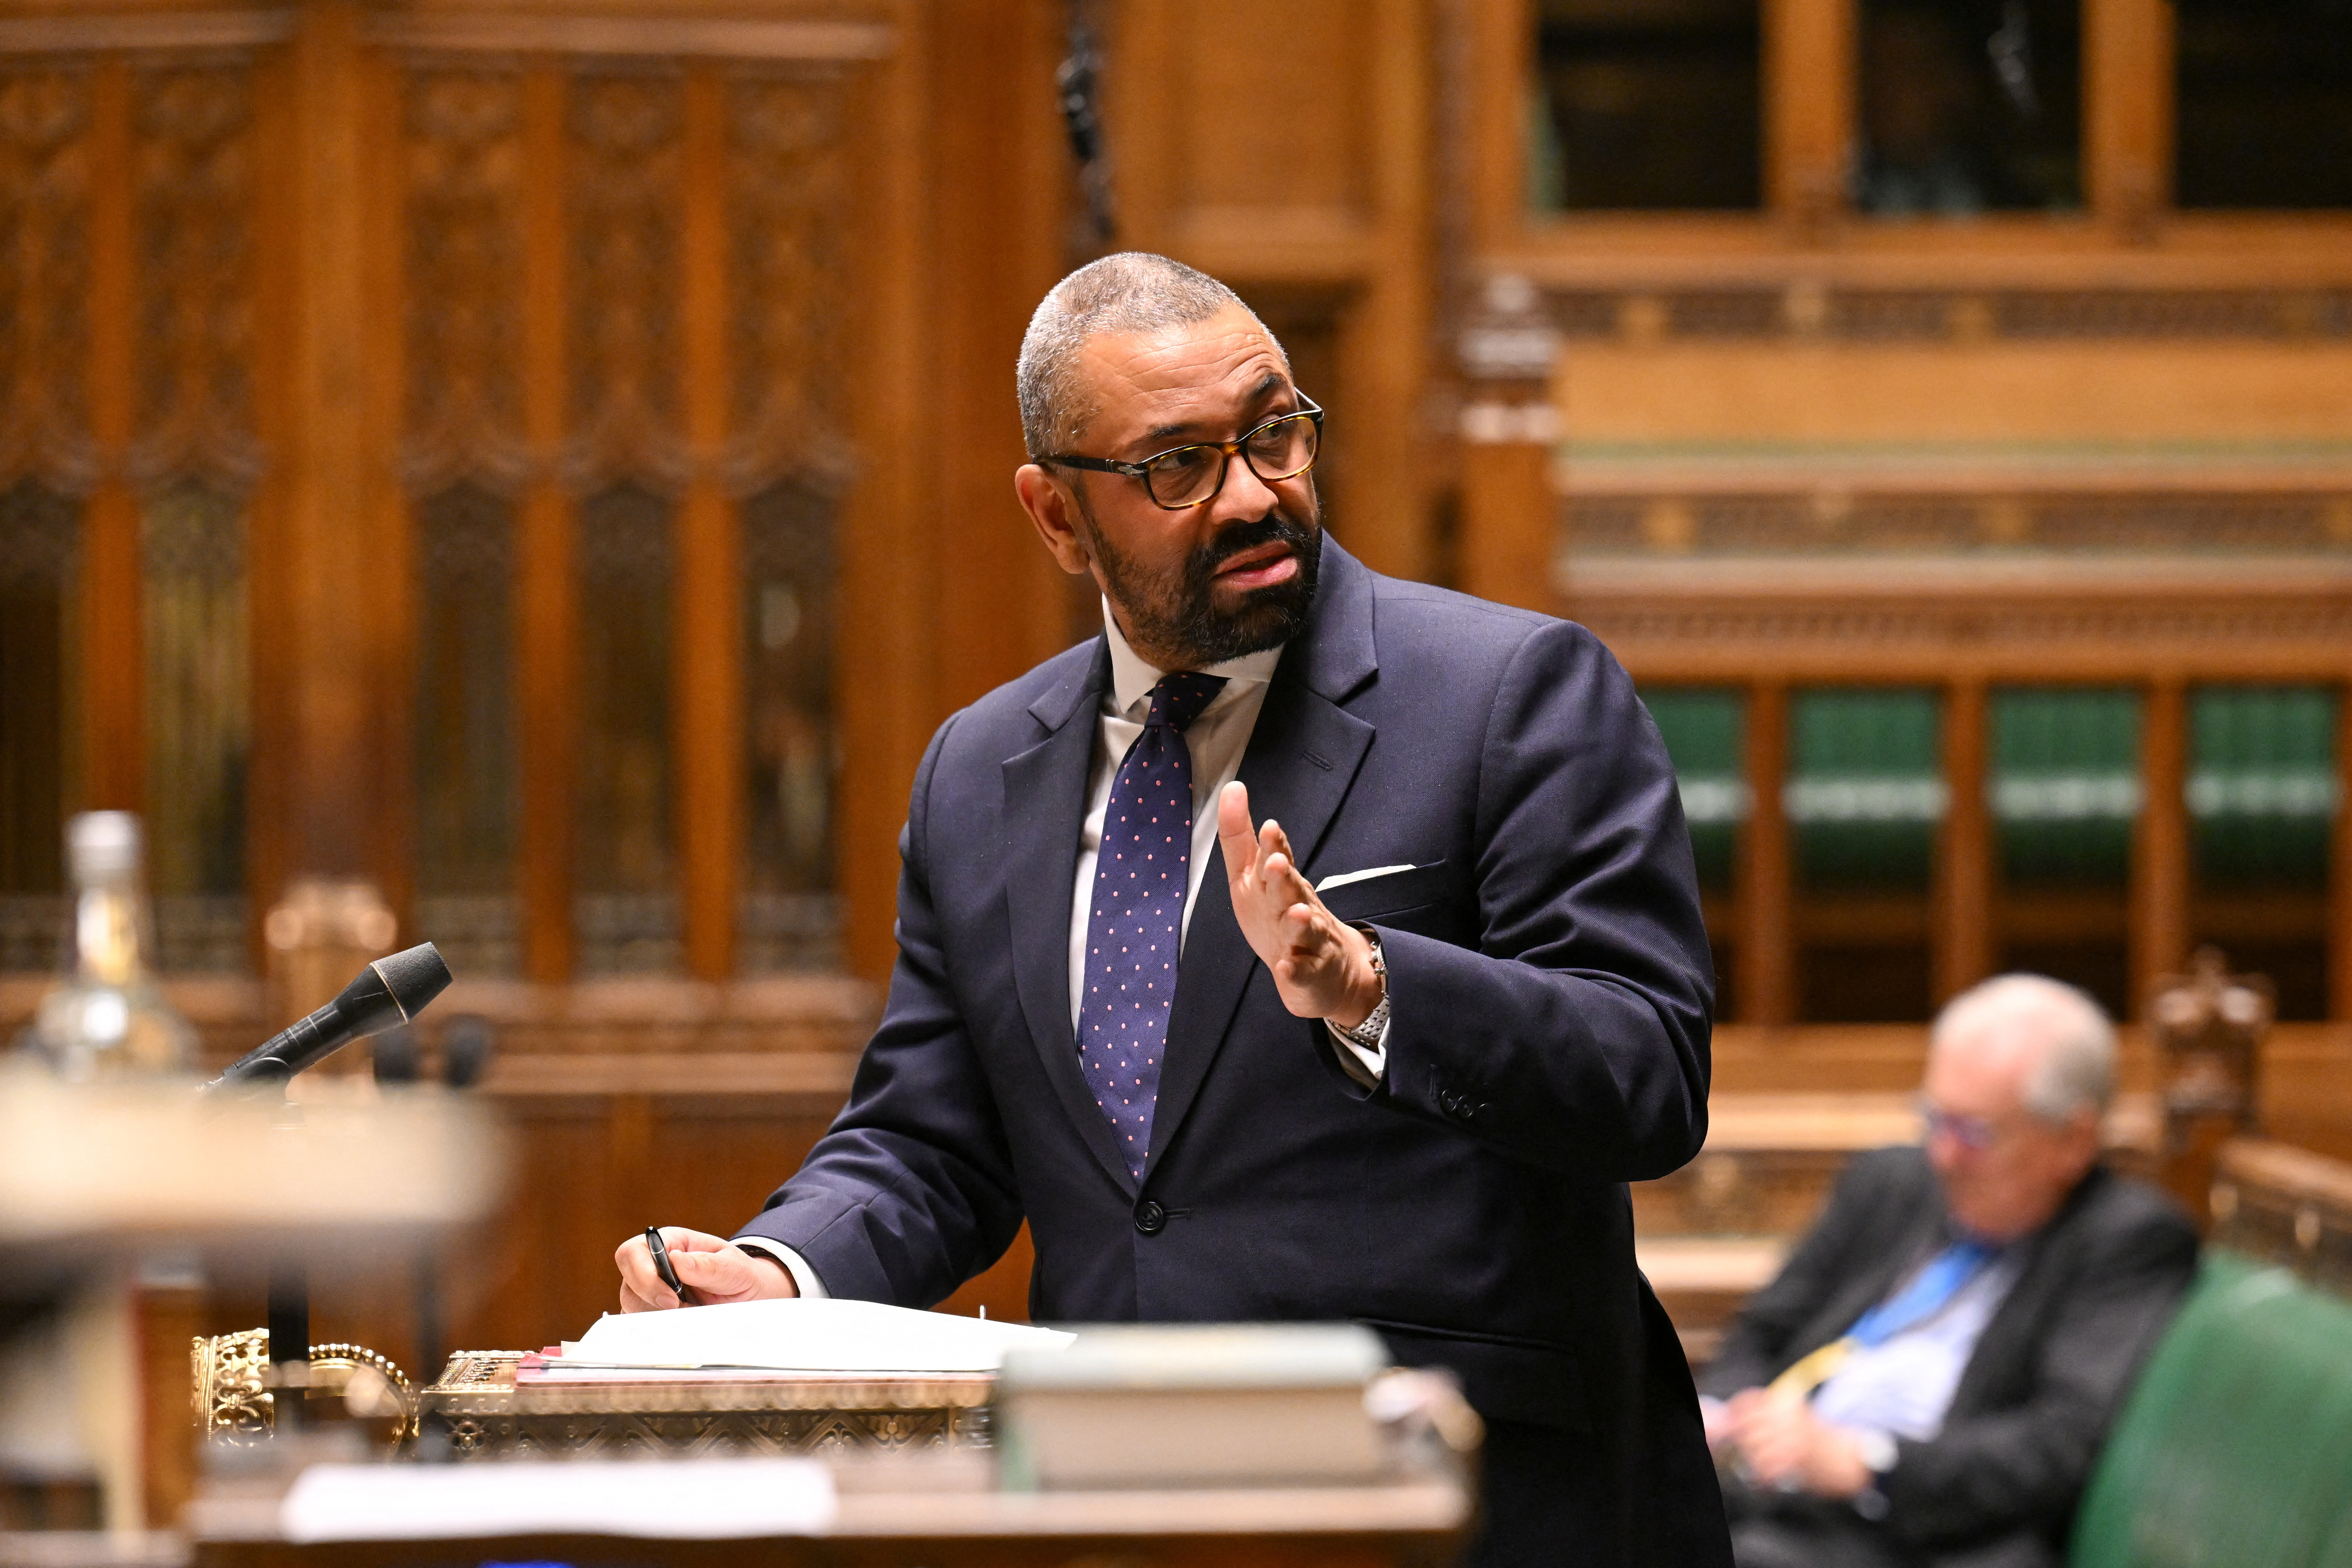 James Cleverly made the announcement in the House of Commons